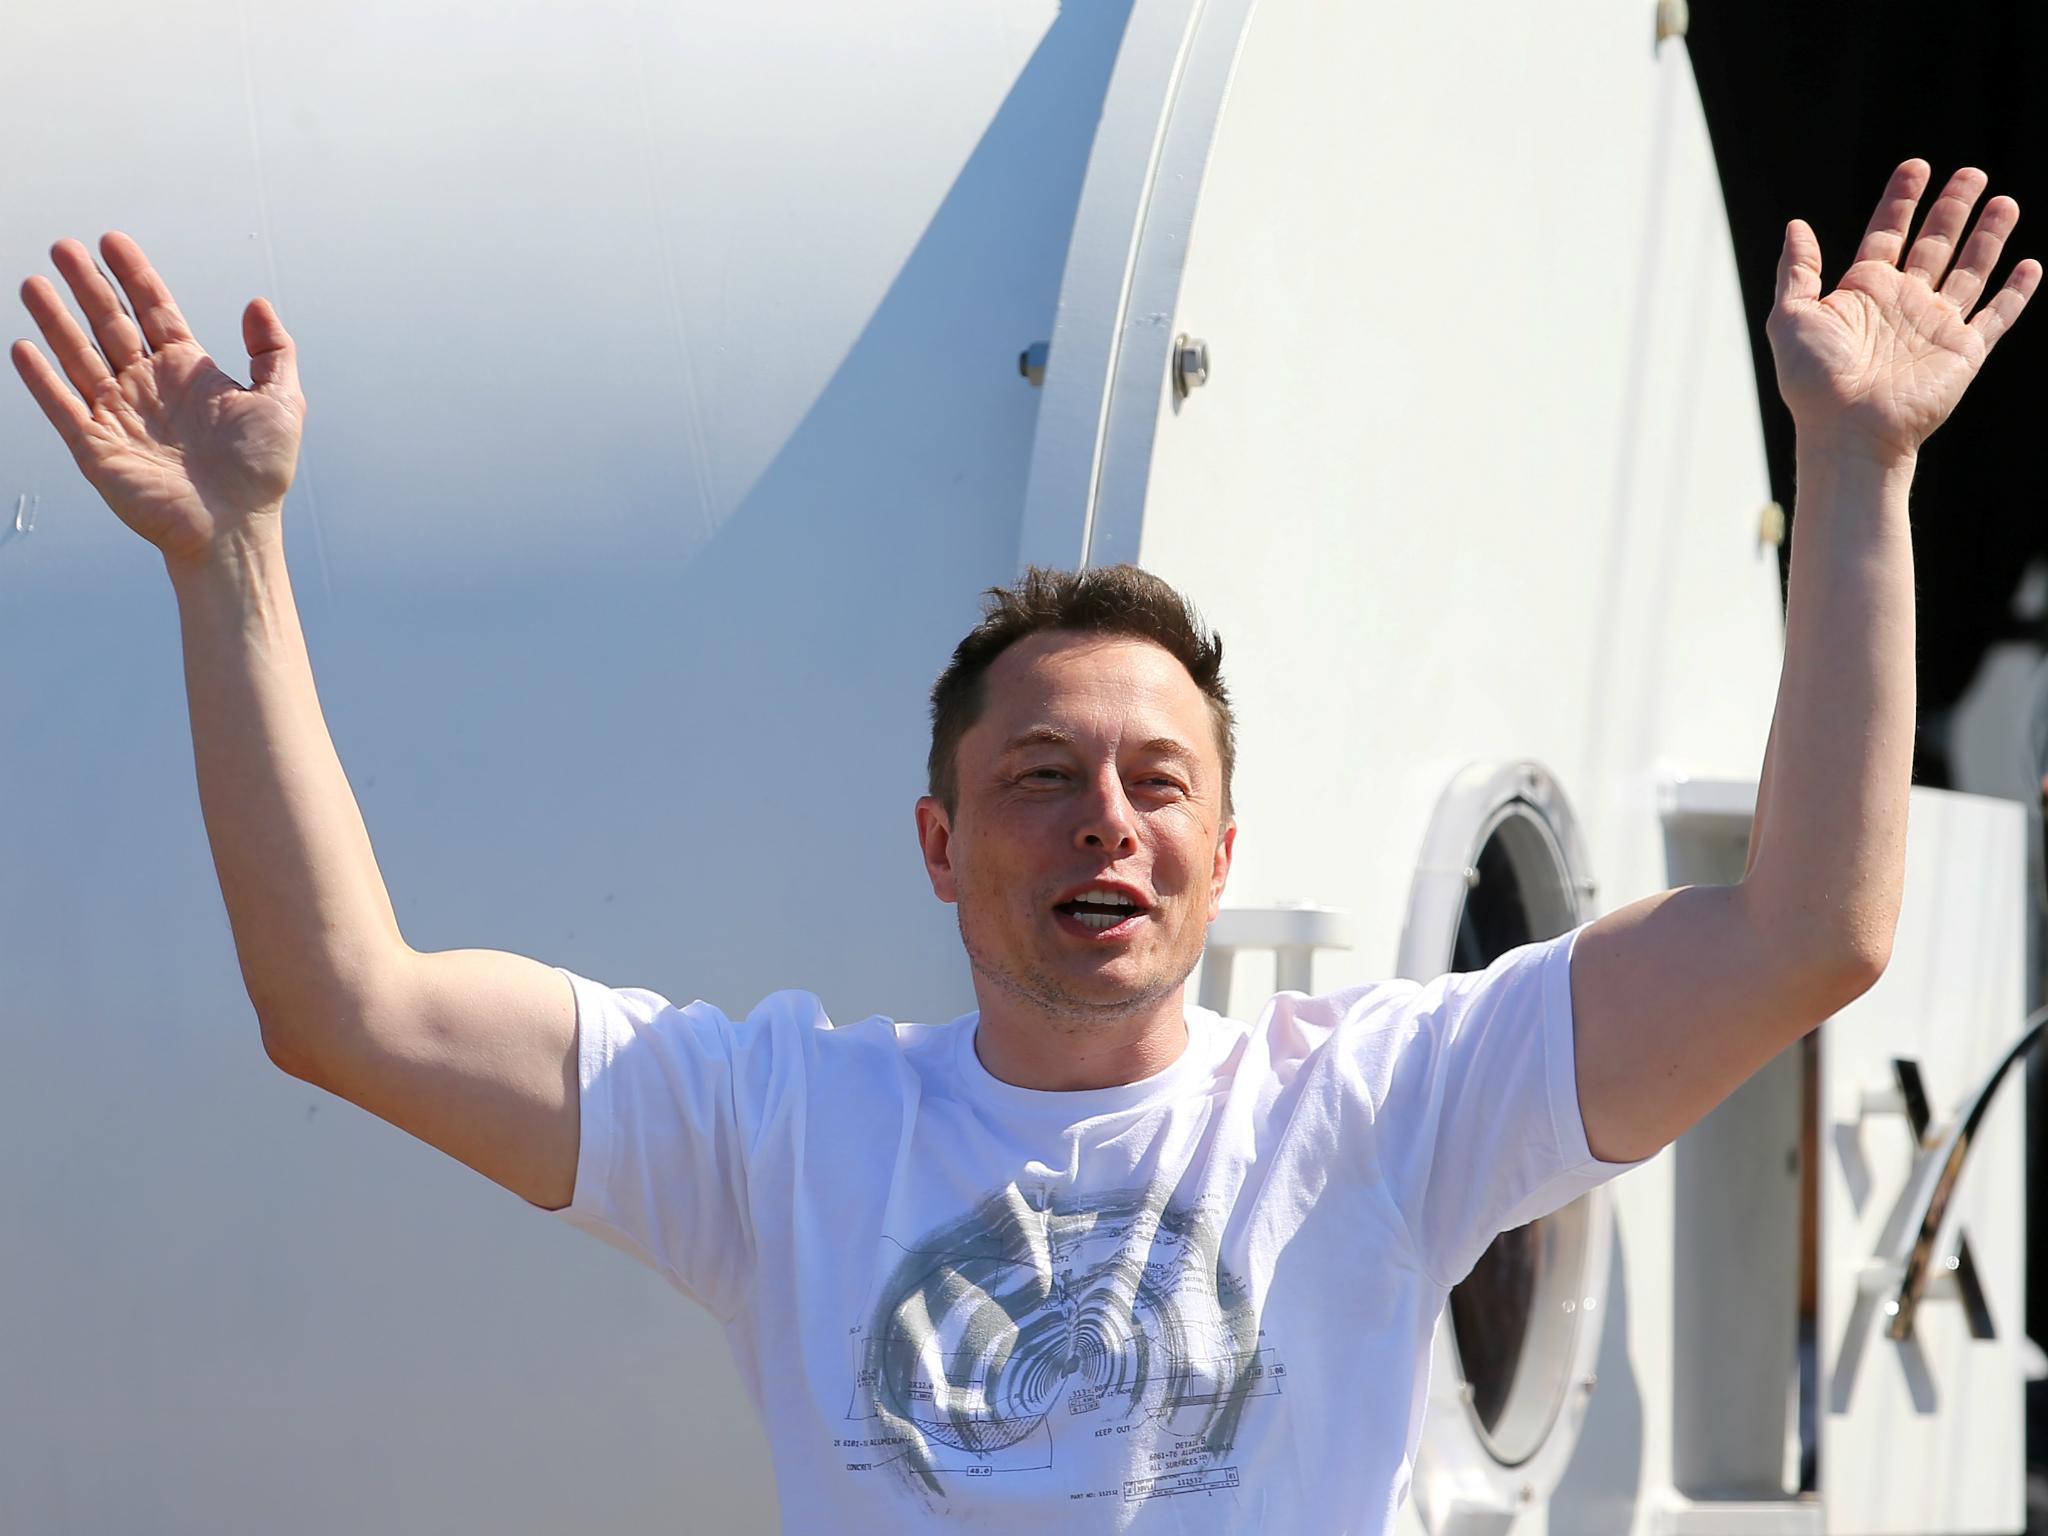 Elon Musk, founder, CEO and lead designer at SpaceX and co-founder of Tesla, arrives at the SpaceX Hyperloop Pod Competition II in Hawthorne, California, U.S., August 27, 2017